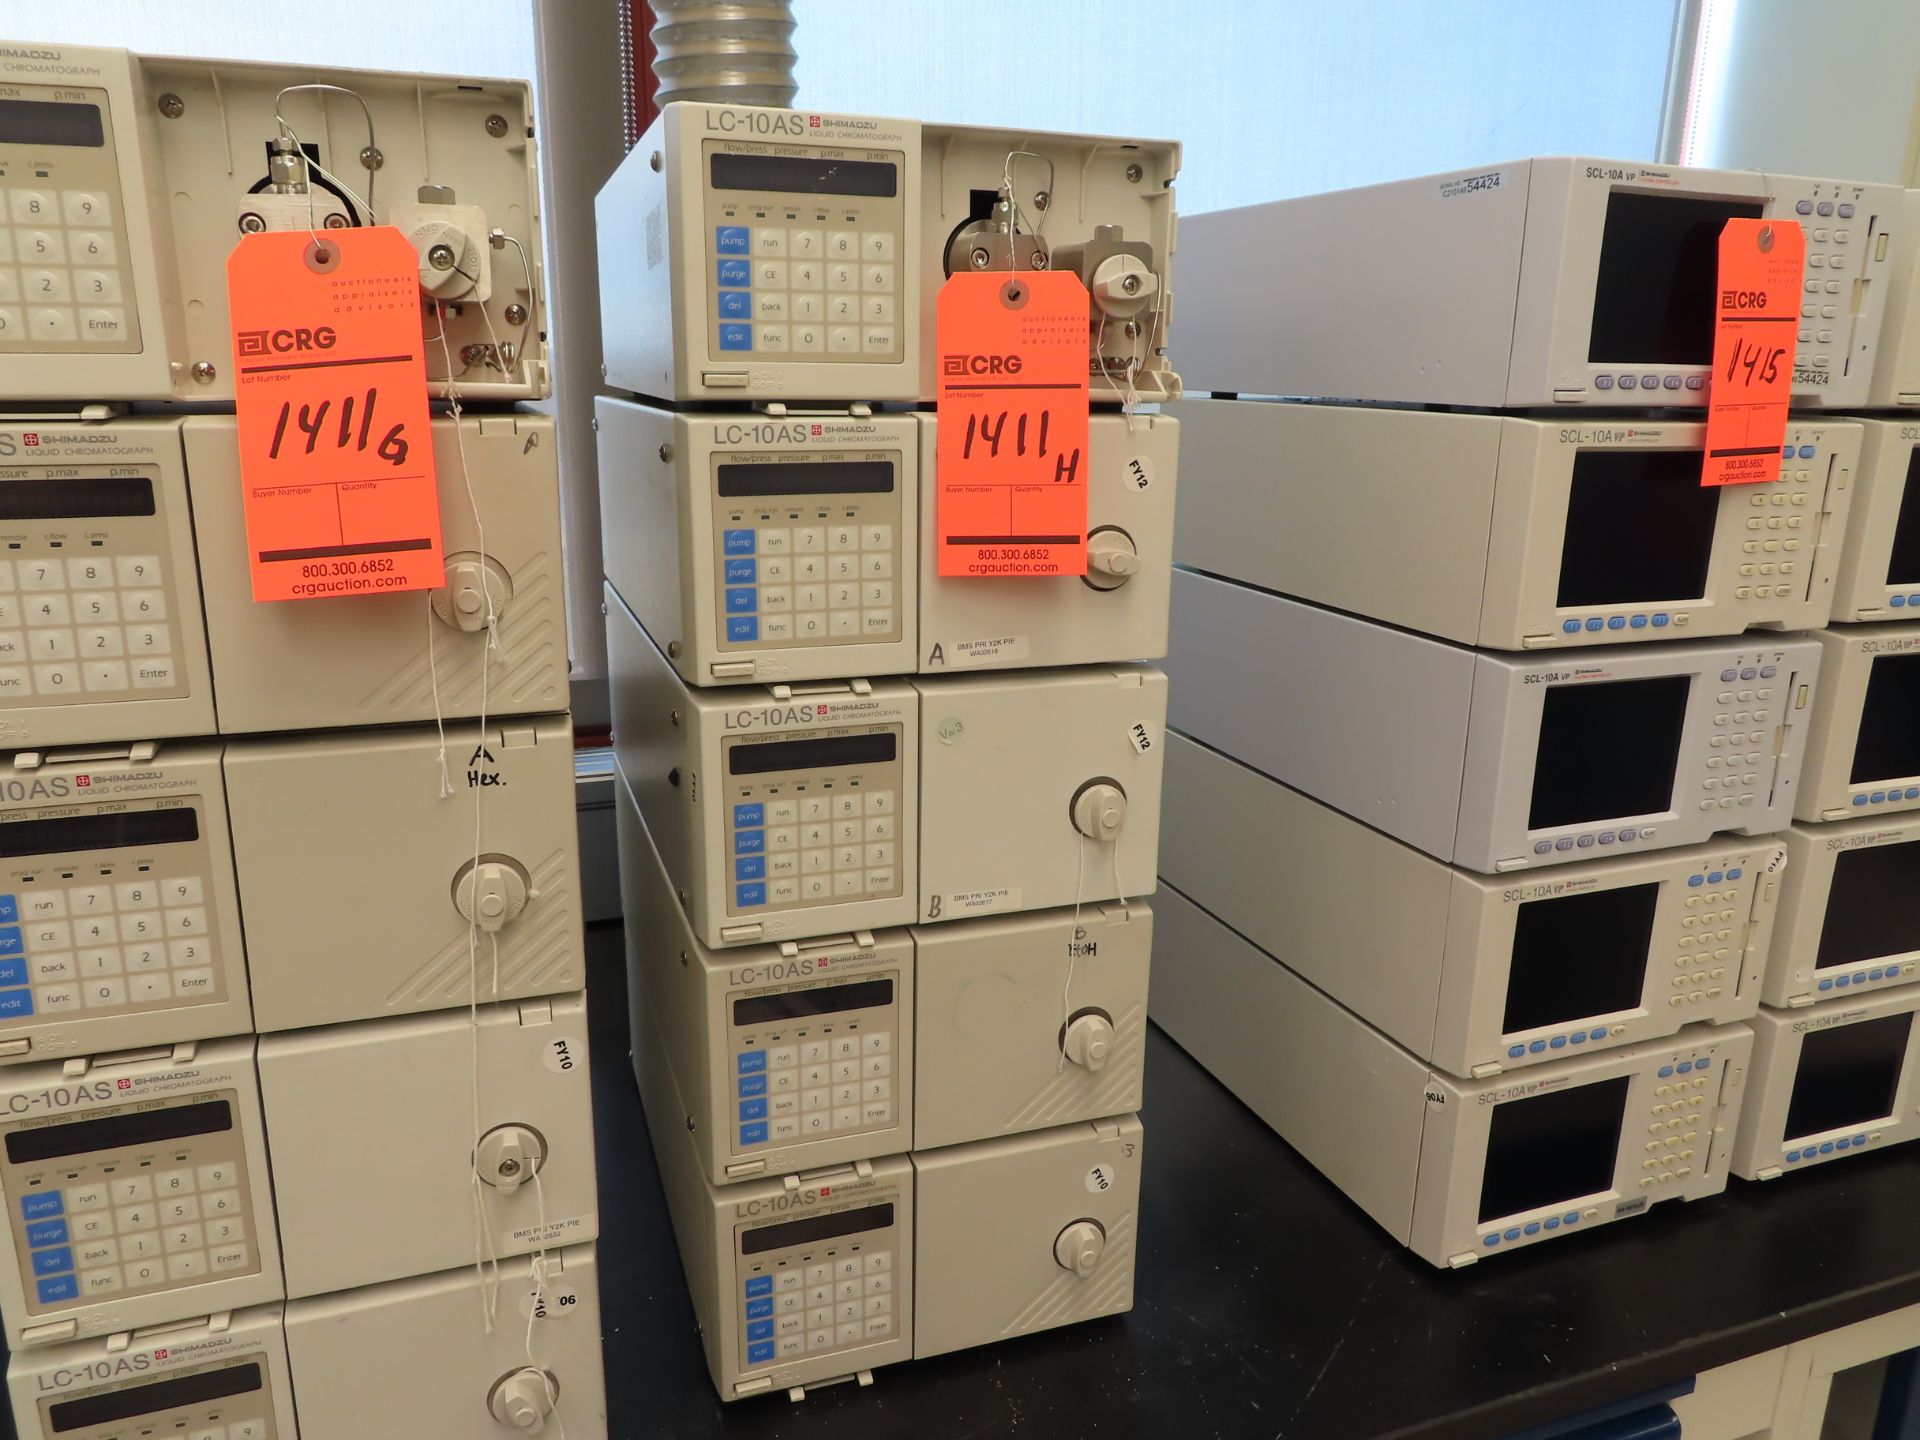 Lot of (5) Shimadzu LC-10AS liquid chromatograph pumps, located in A Wing, 4th floor room 401A